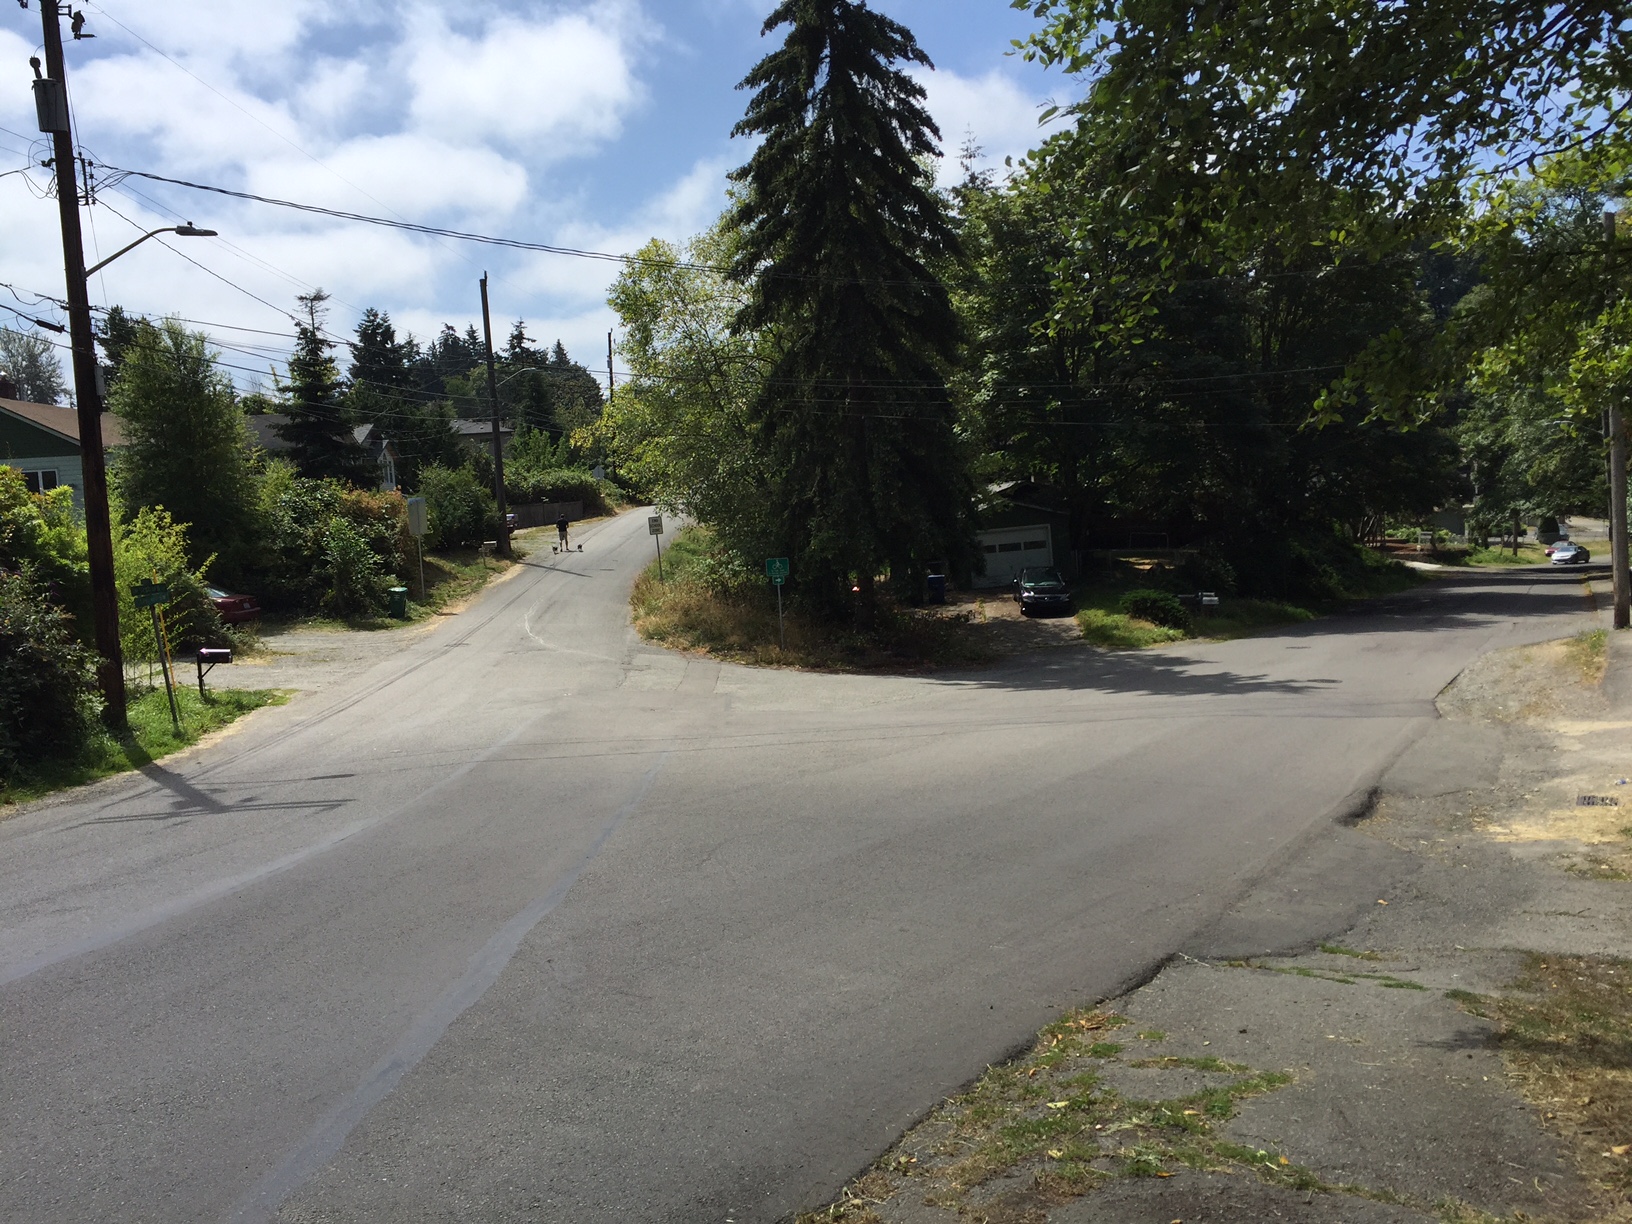 Intersection of 18th Ave SW and SW Orchard before improvements